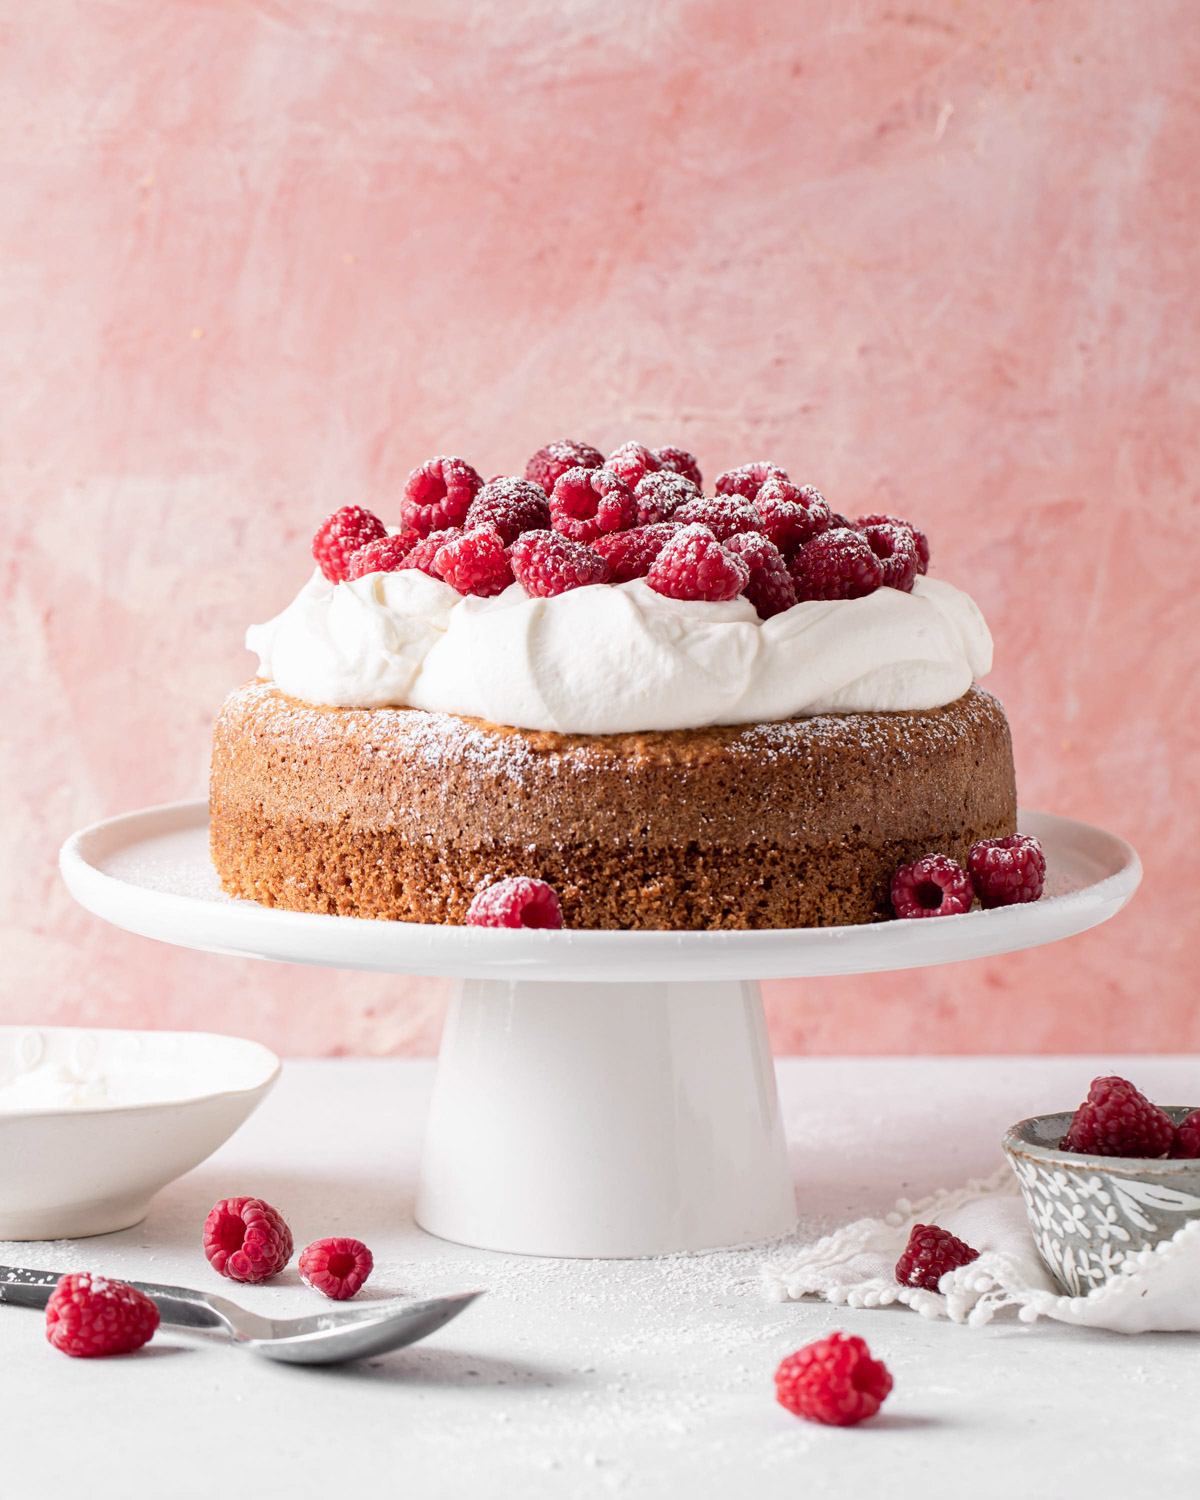 A single layer Greek yogurt cake with olive oil topped with whipped cream and tons of raspberries